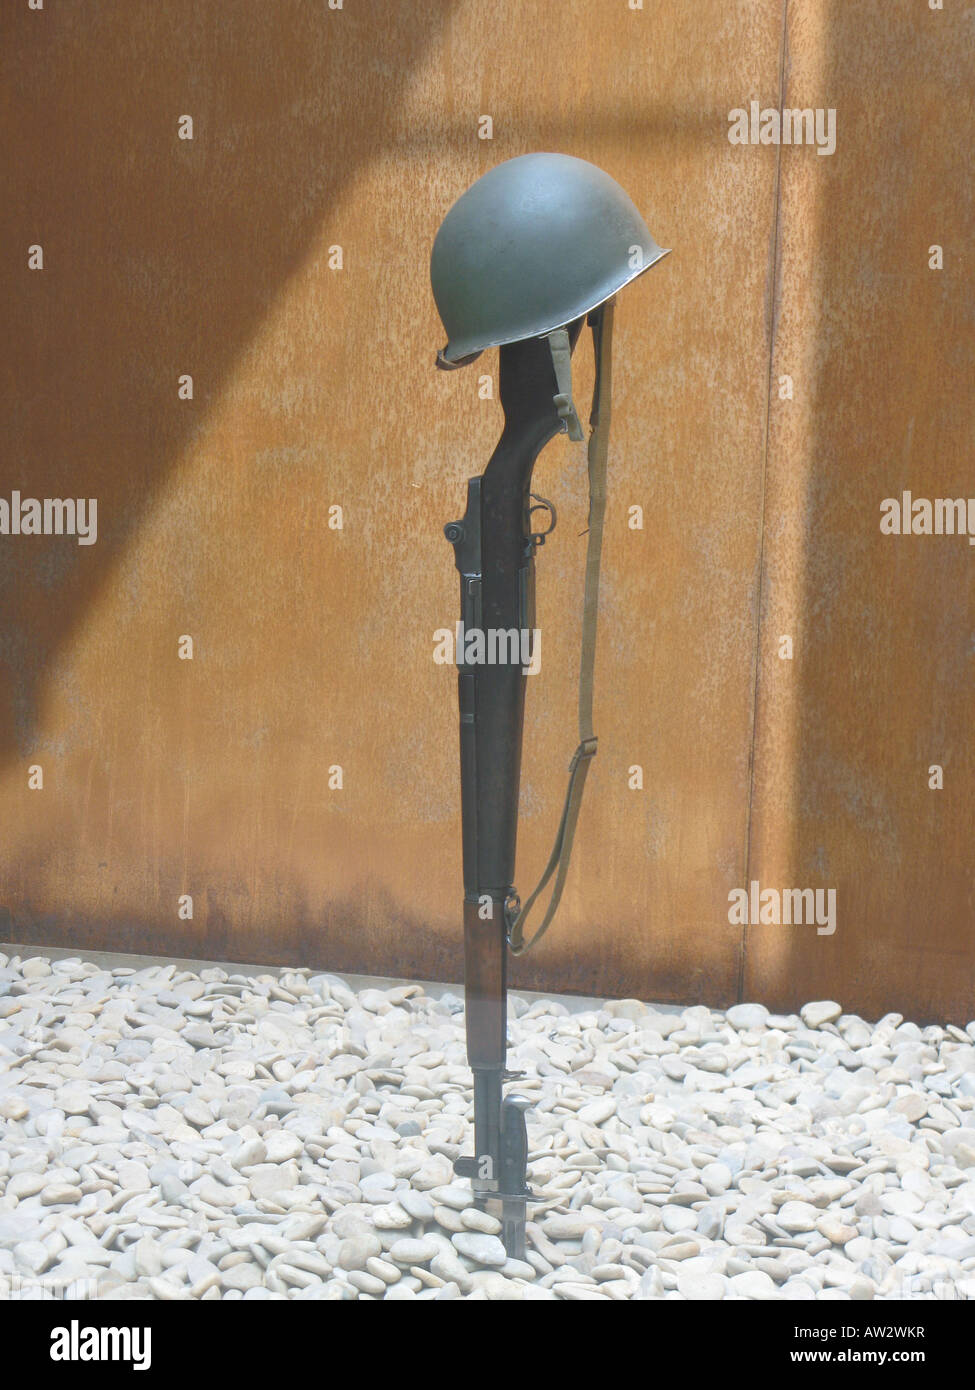 WW2 Garand rifle and M-1 helmet mark resting place for fallen comrade in arms d-day anniversary Stock Photo